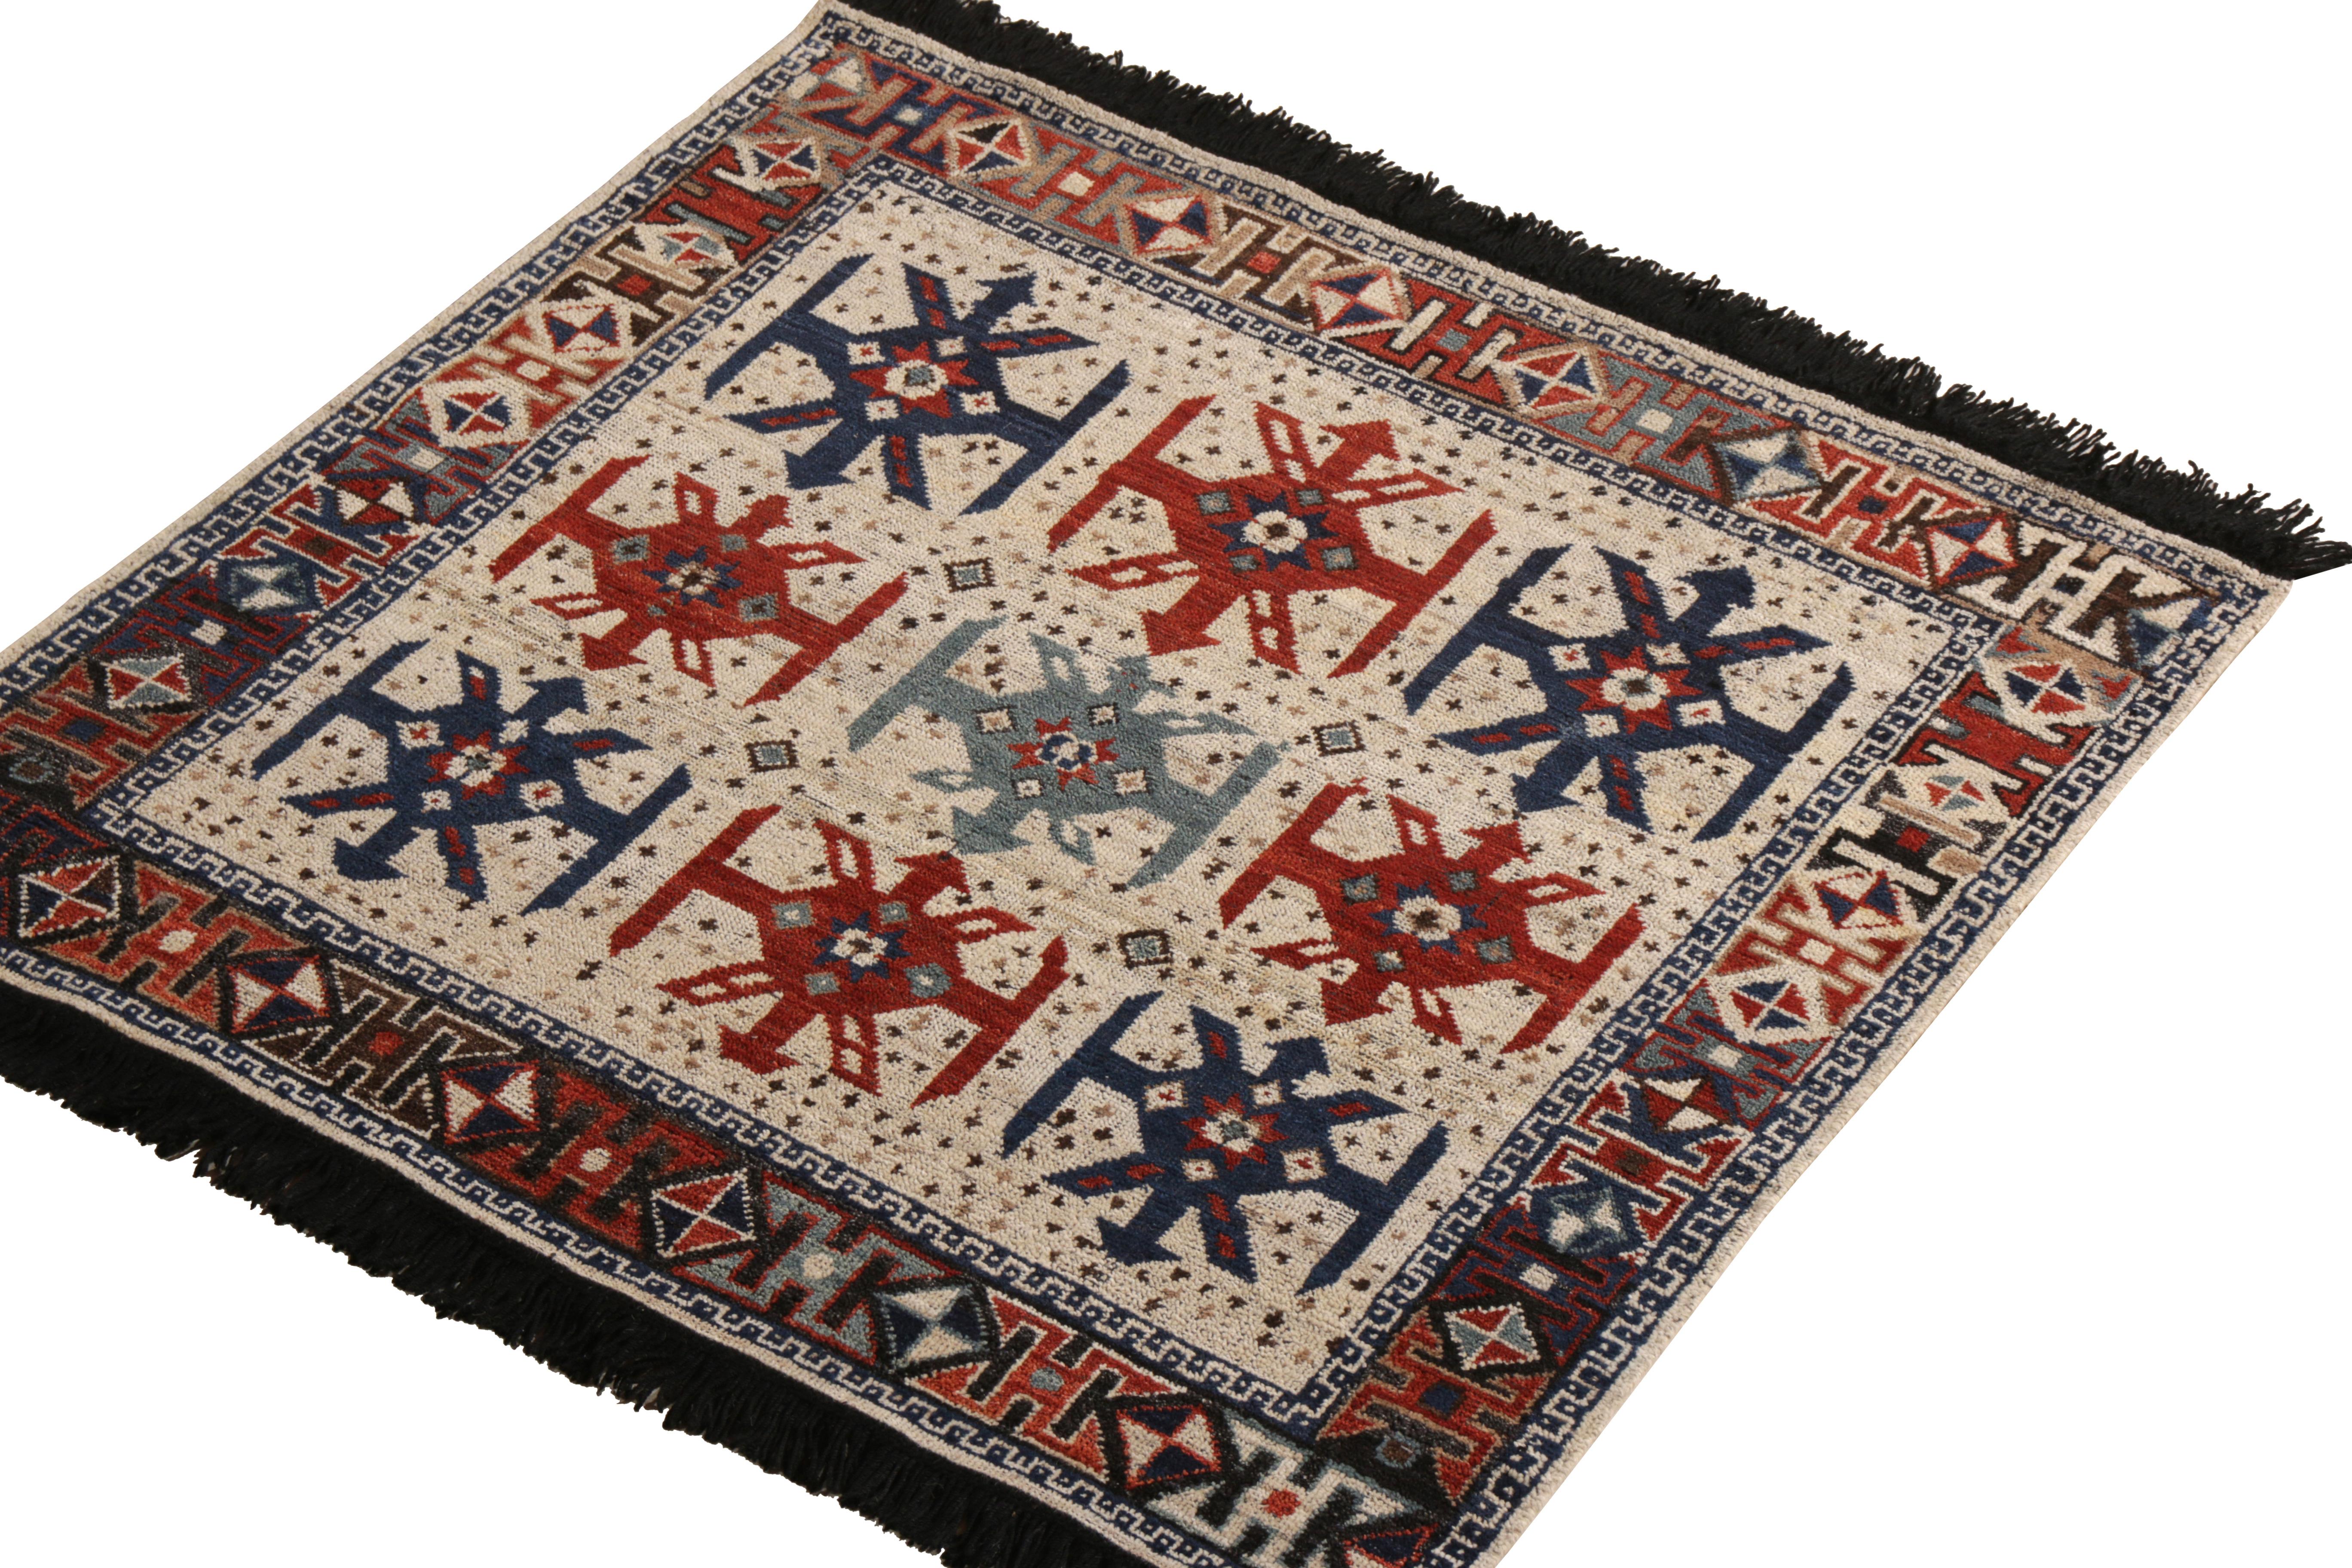 A 4x4 ode to classic tribal rug styles from Rug & Kilim’s Burano Collection. Hand knotted in soft Ghazni wool, playing rich burgundy and blue on beige in medallions and similar geometric patterns. 

On the design: The play of the square size with